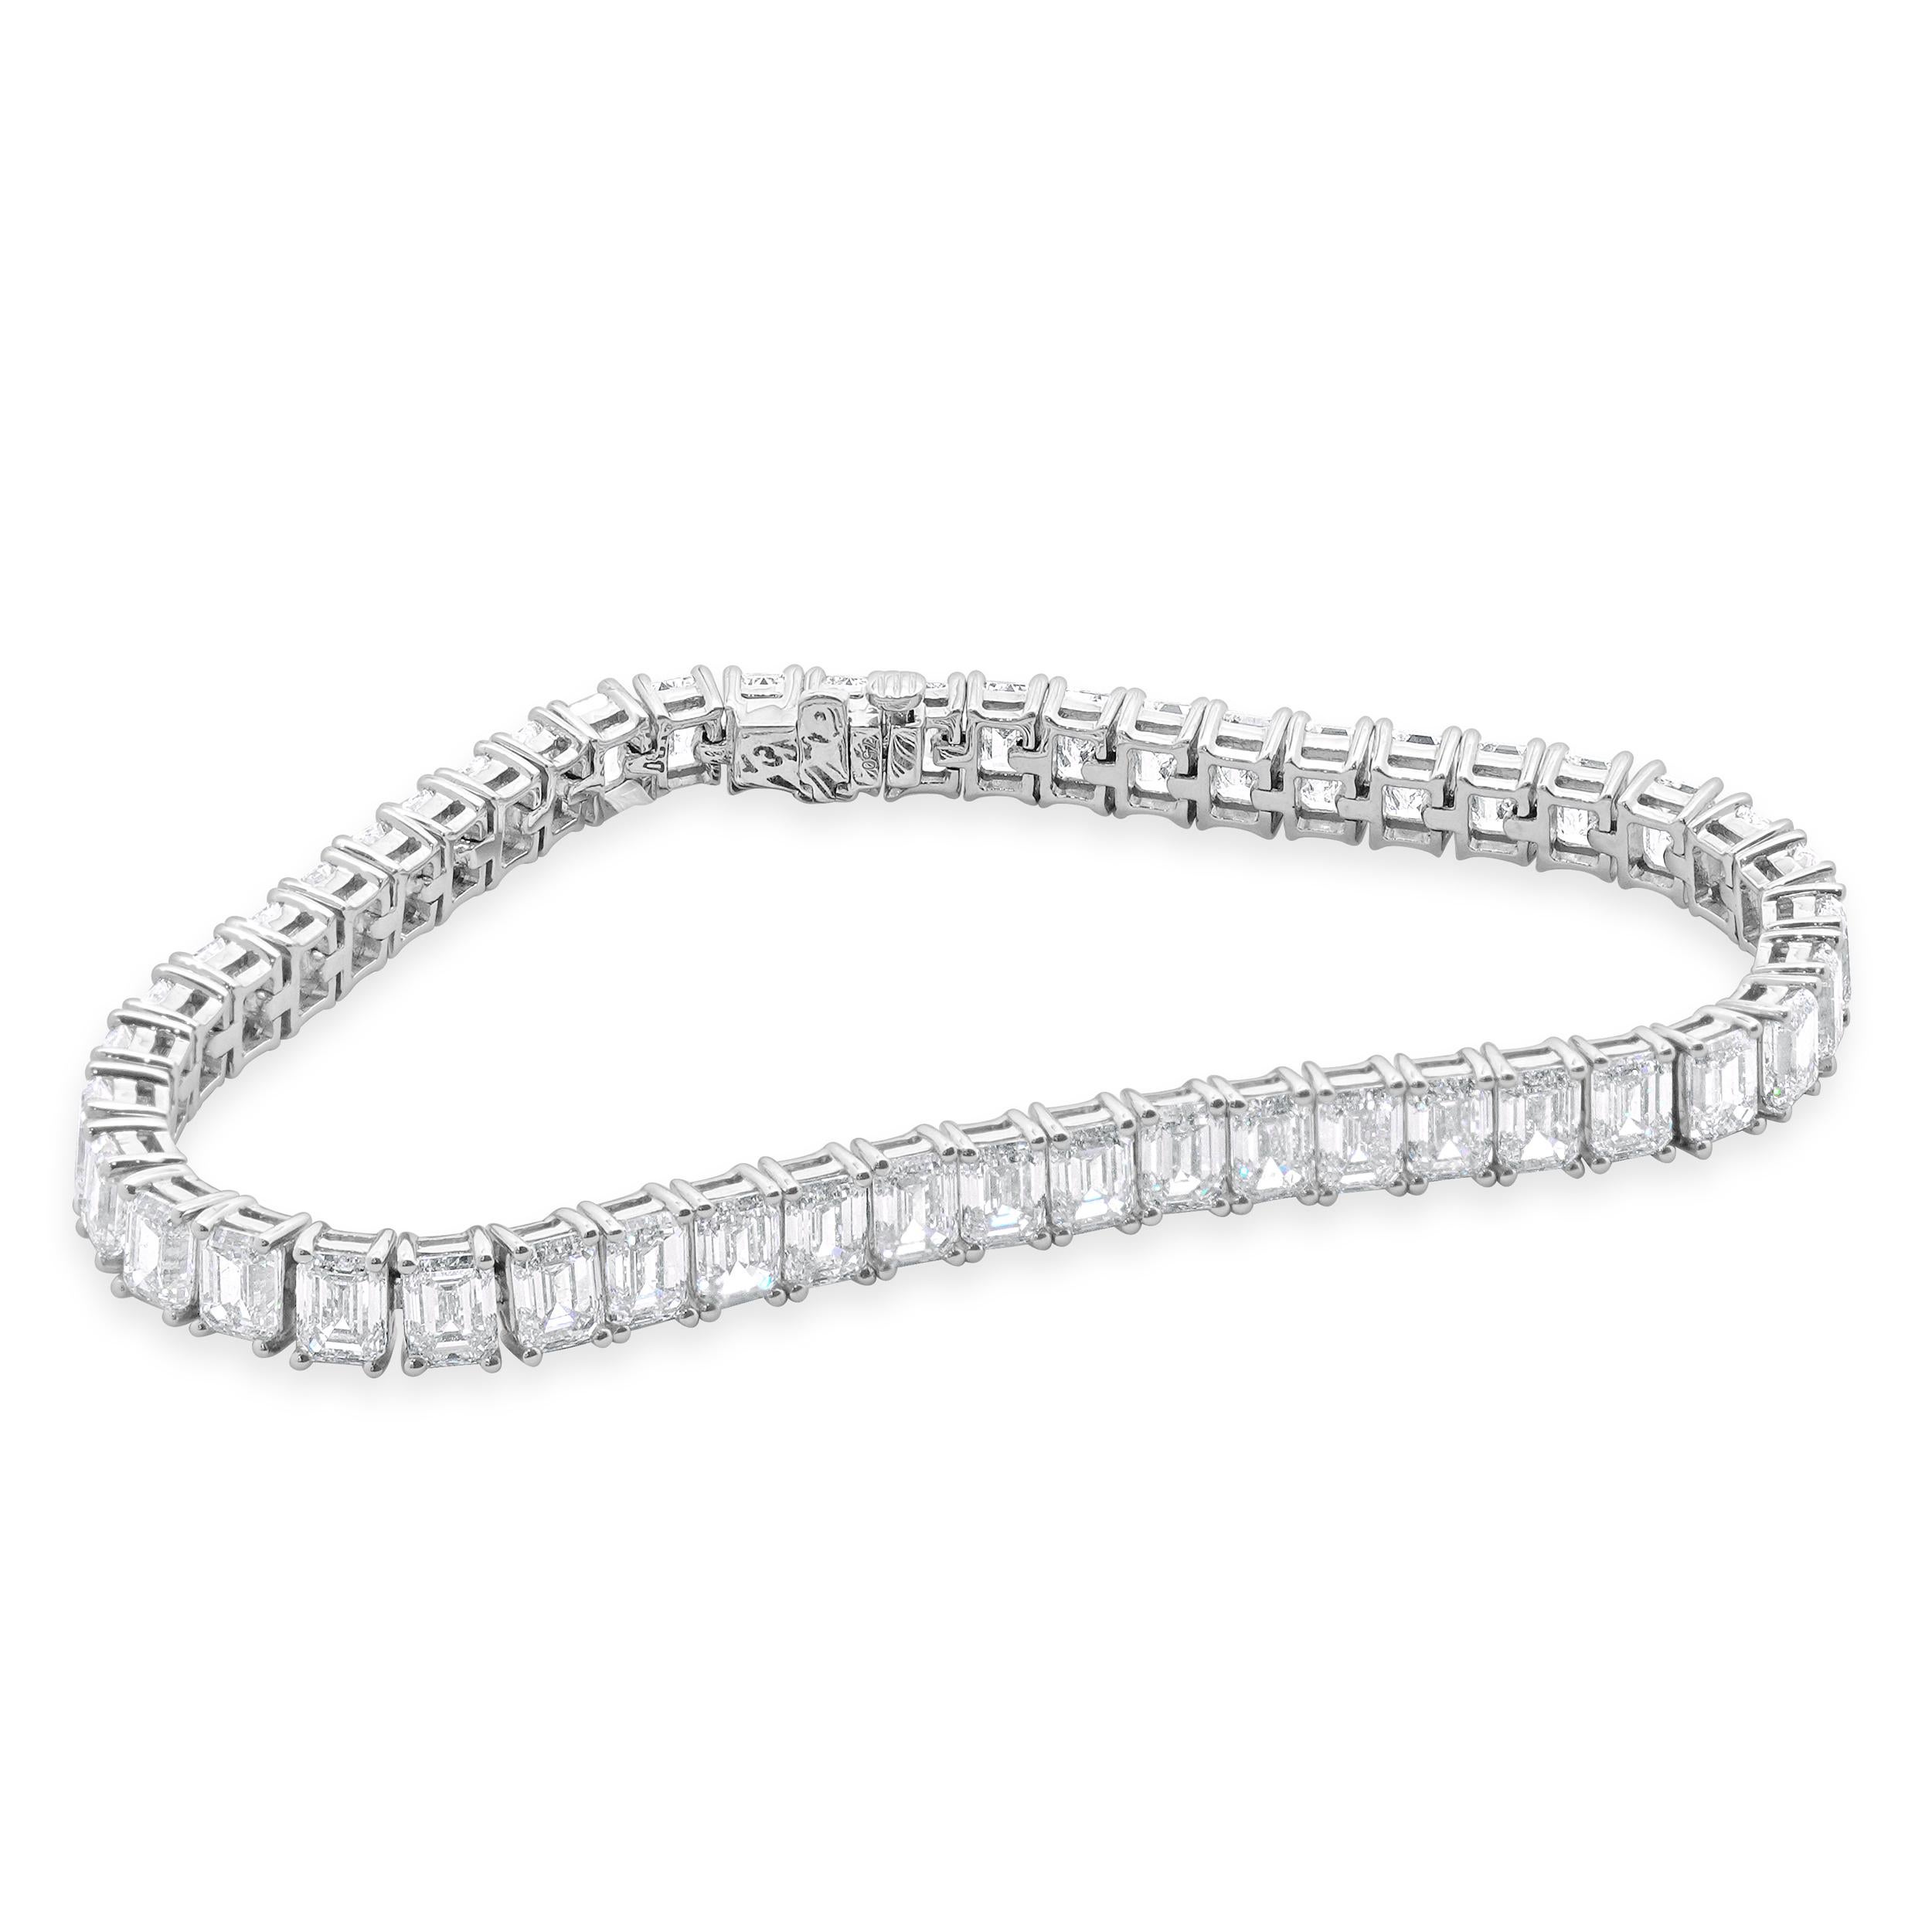 Designer: custom design
Material: 18K white Gold
Diamond: 48 emerald cut= 18.10cttw
Color: G
Clarity: VS
Dimensions: bracelet will fit up to a 7-inch wrist
Weight: 17.31 grams
